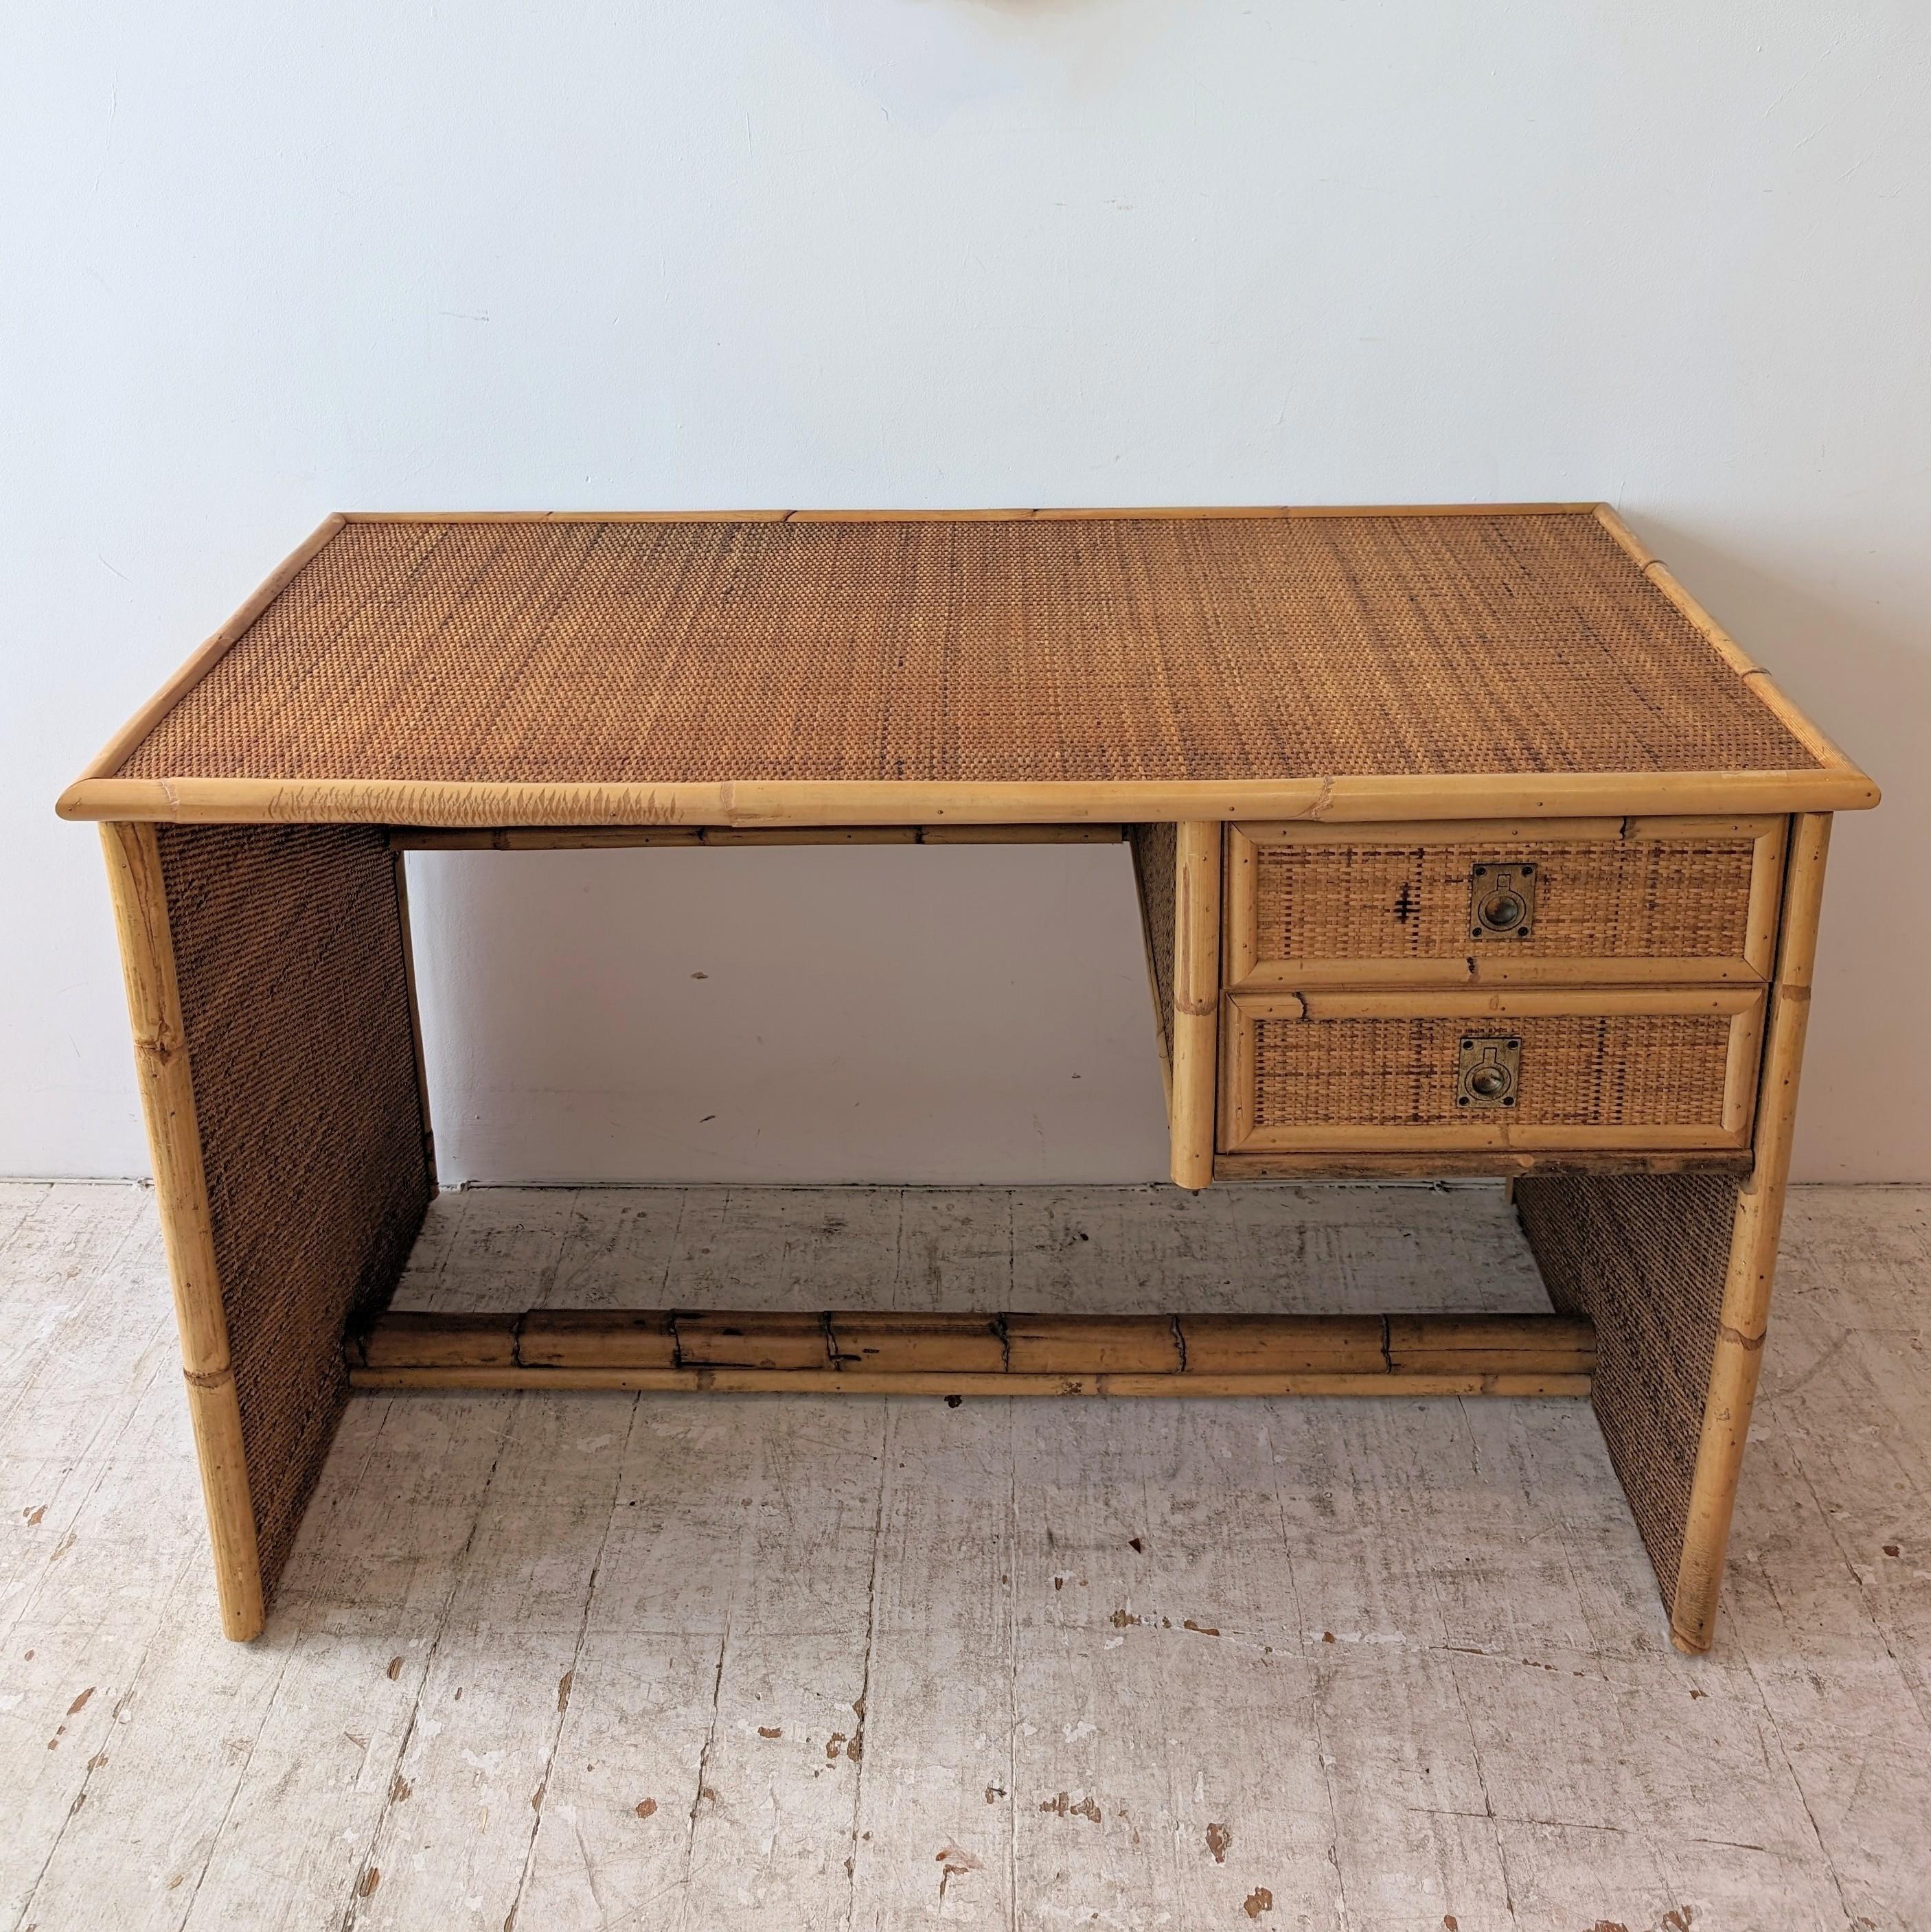 Vintage bamboo and rattan desk / dressing table by Dal Vera, Italy 1970s. Two drawers with brass ring-pull handles. Bamboo foot rest, rattan modesty panel. There's a slight natural curve in the right hand bamboo upright.
The matching chair in the